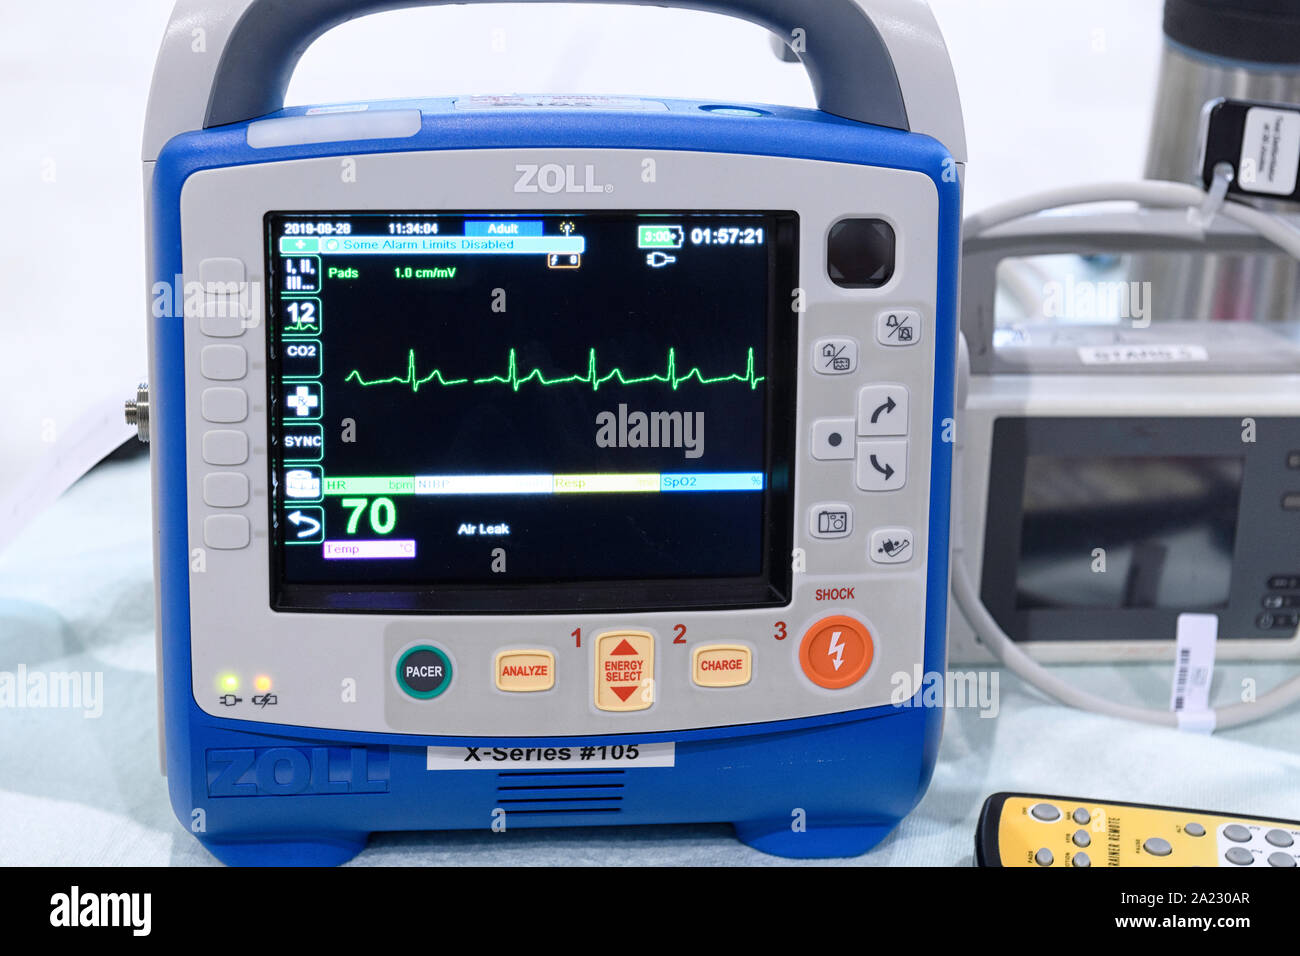 Heart monitor and or defibrillator, Stock Photo